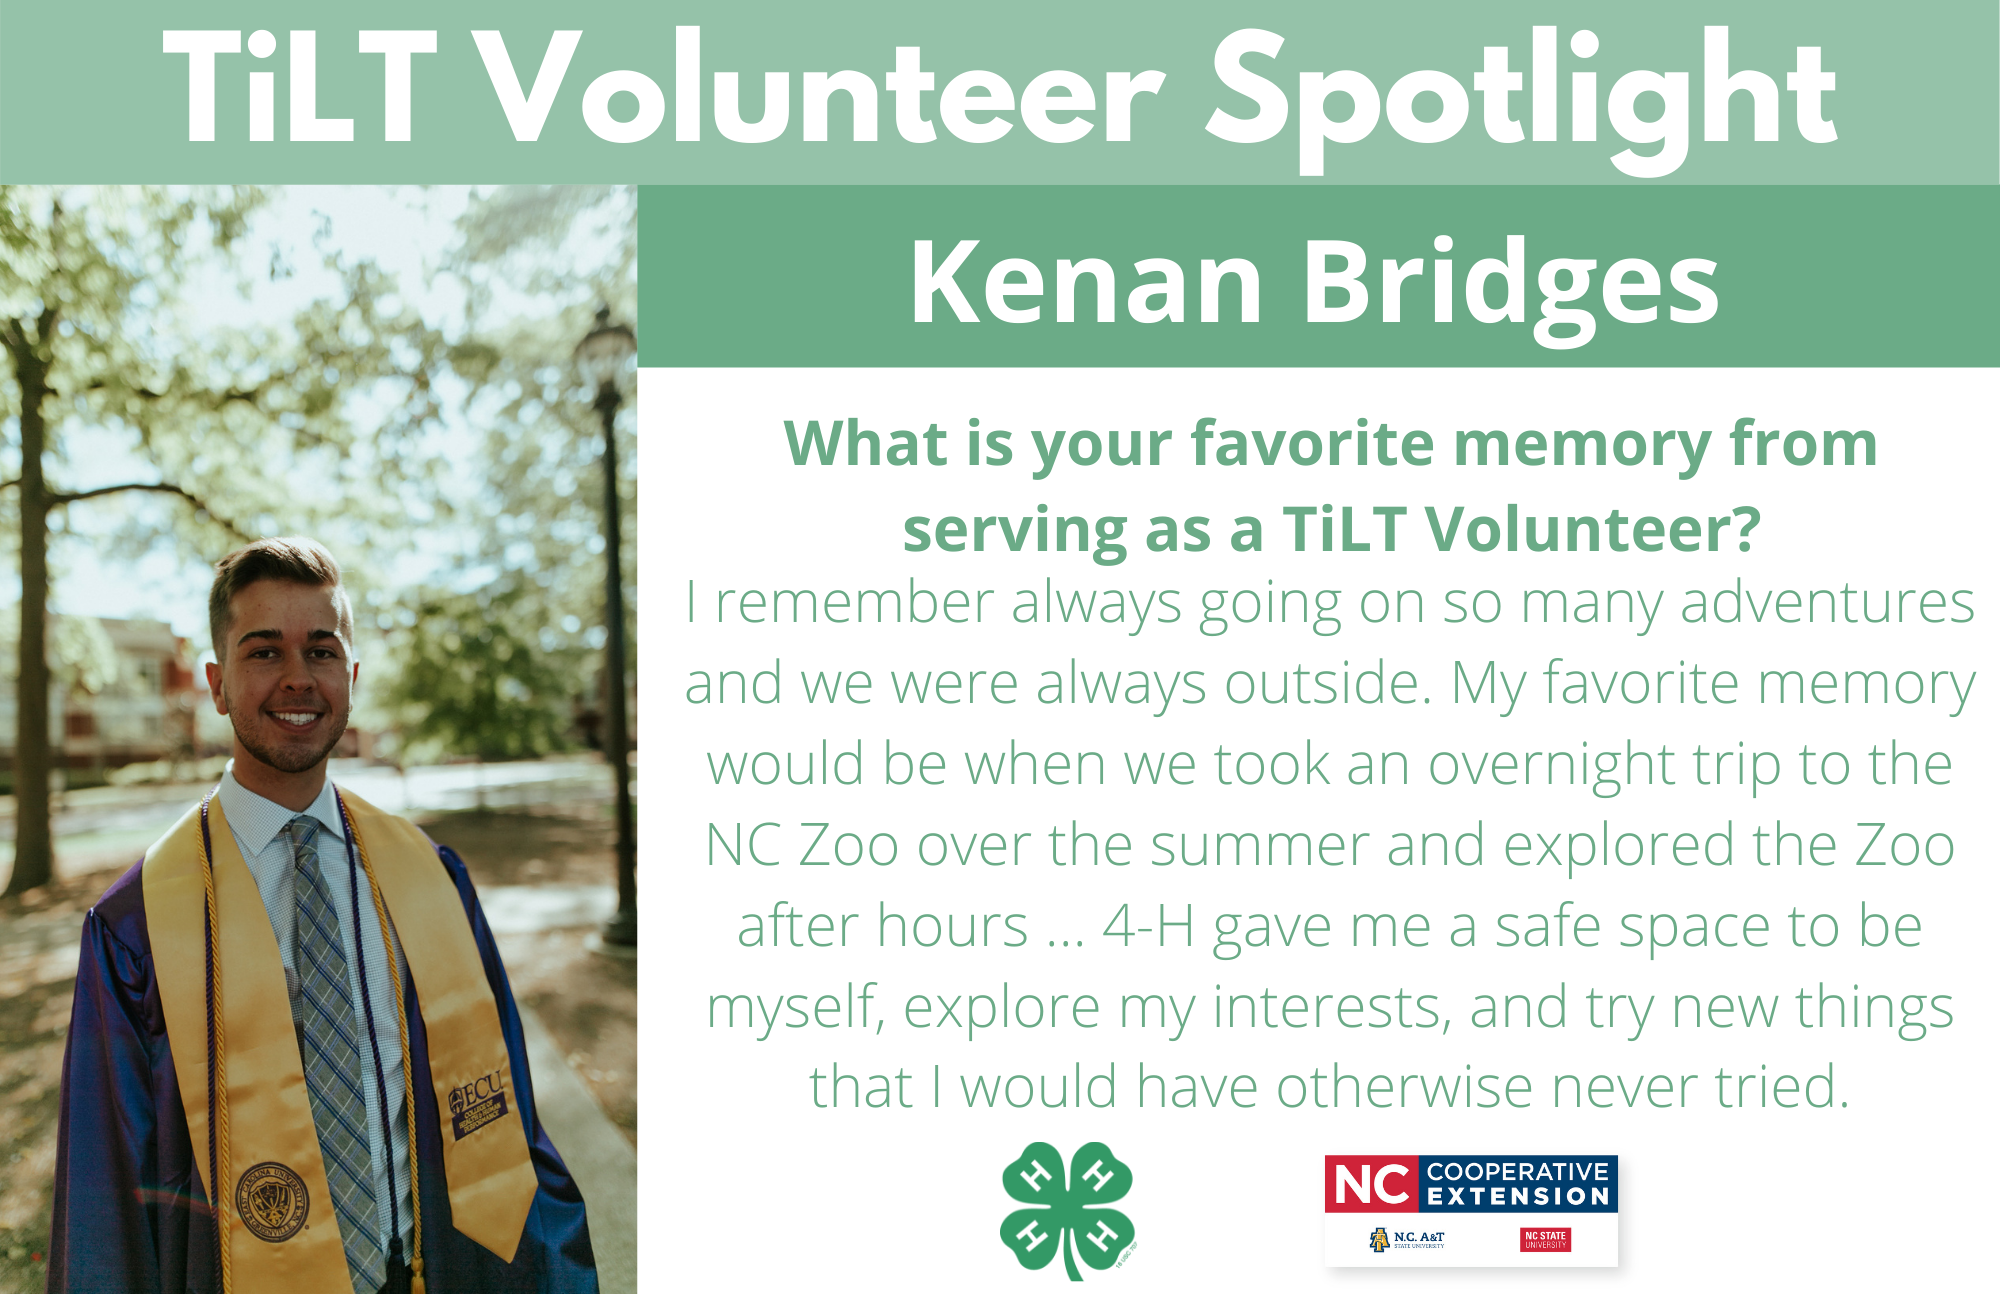 Headshot of Kenan Bridges in graduation regalia from East Carolina University with following text to the right of image.TiLT Volunteer Spotlight. Kenan Bridges. What is your favorite memory from serving as a TiLT Volunteer? I remember always going on so many adventures and we were always outside. My favorite memory would be when we took an overnight trip to the NC Zoo over the summer and explored the Zoo after hours ... 4-H gave me a safe space to be myself, explore my interests, and try new things that I would have otherwise never tried.